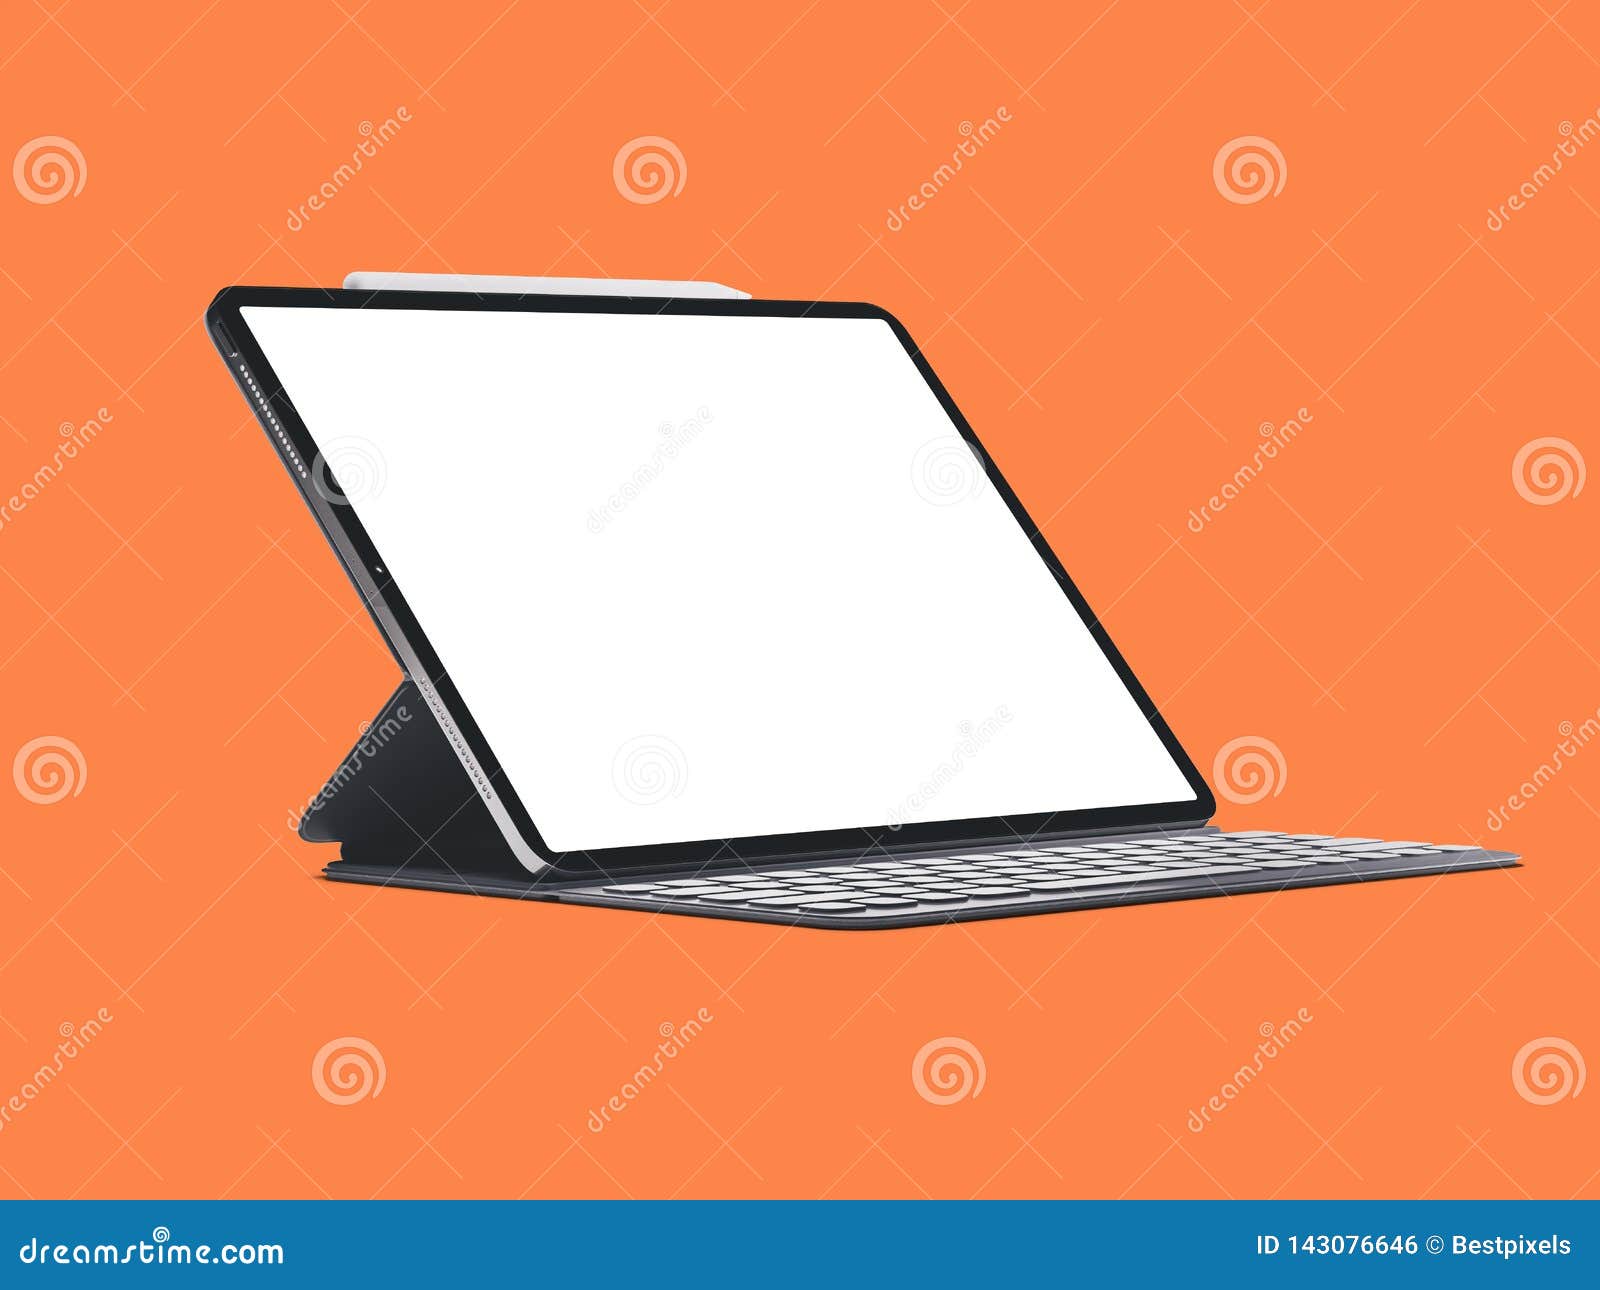 blank screen tablet on color background.  ipad.